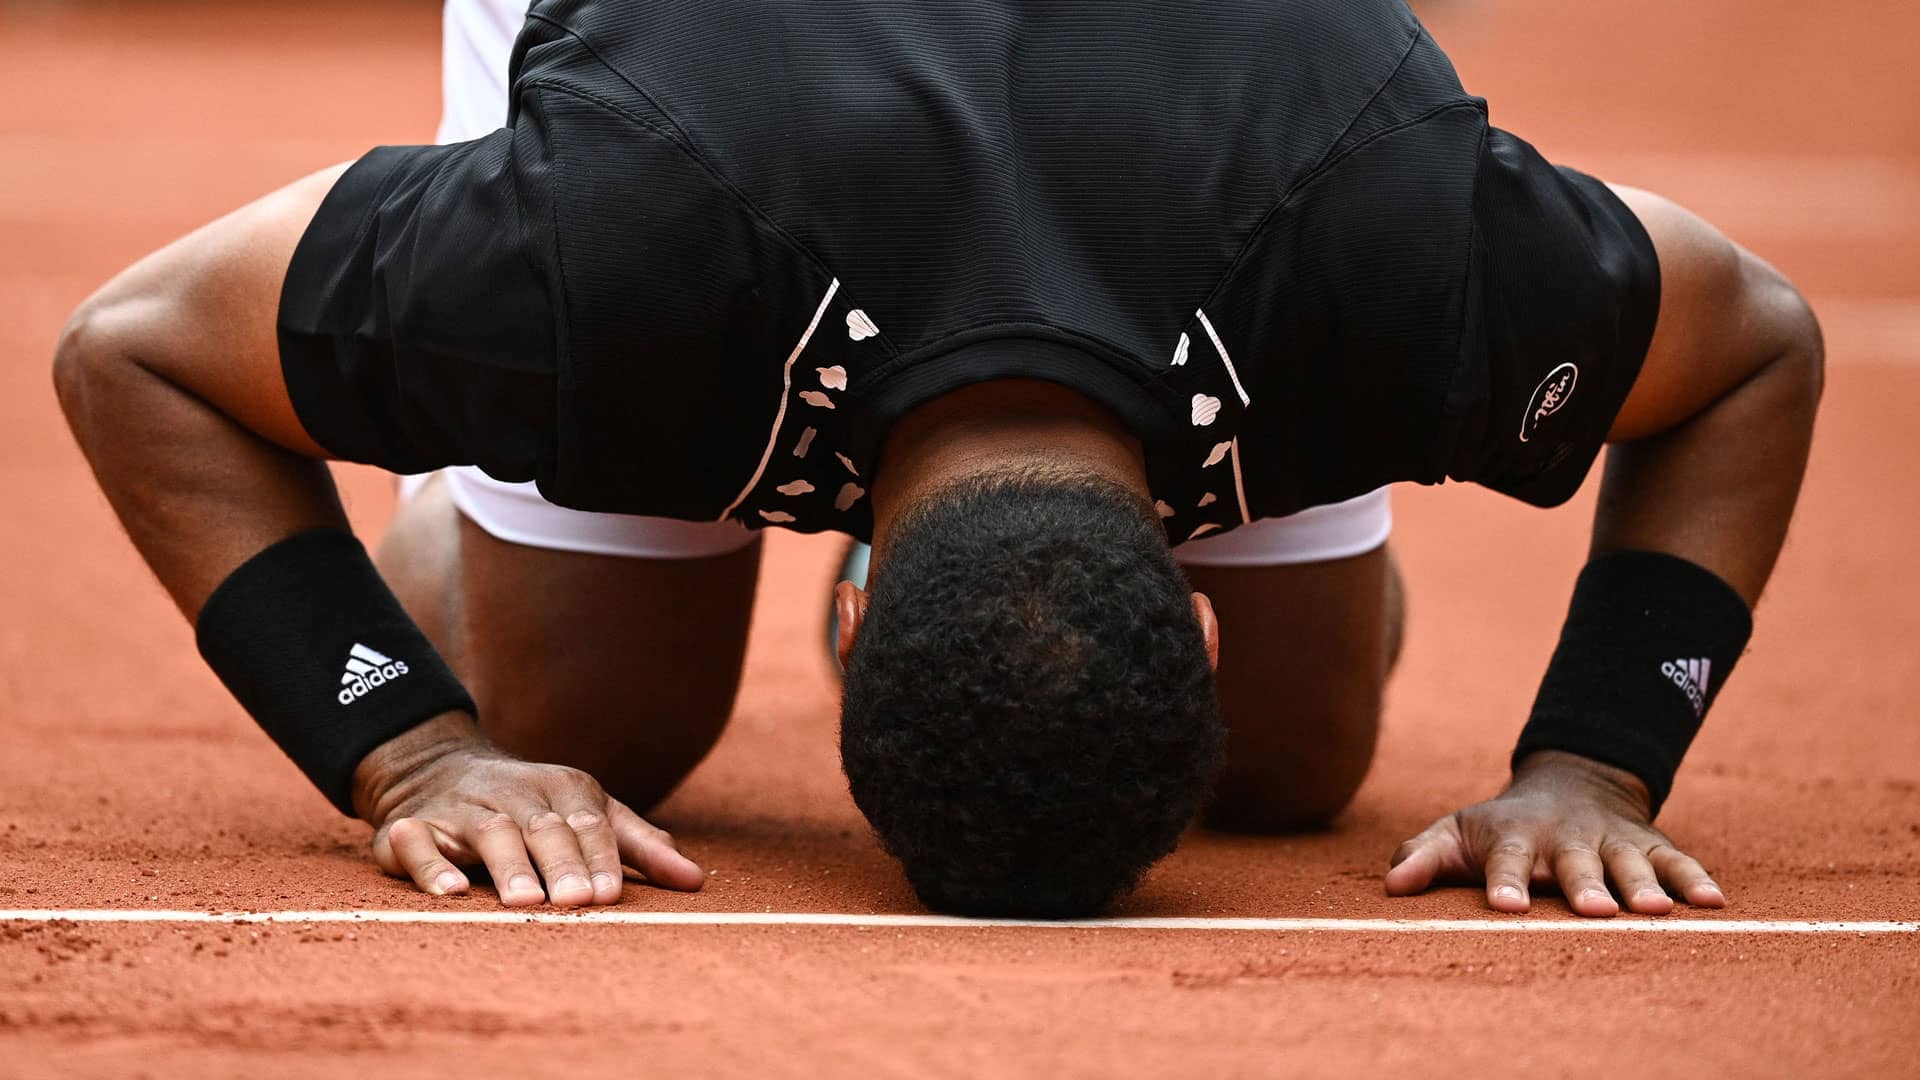 <a href='https://www.atptour.com/en/players/jo-wilfried-tsonga/t786/overview'>Jo-Wilfried Tsonga</a> kneels to the ground after concluding his career at <a href='https://www.atptour.com/en/tournaments/roland-garros/520/overview'>Roland Garros</a>.